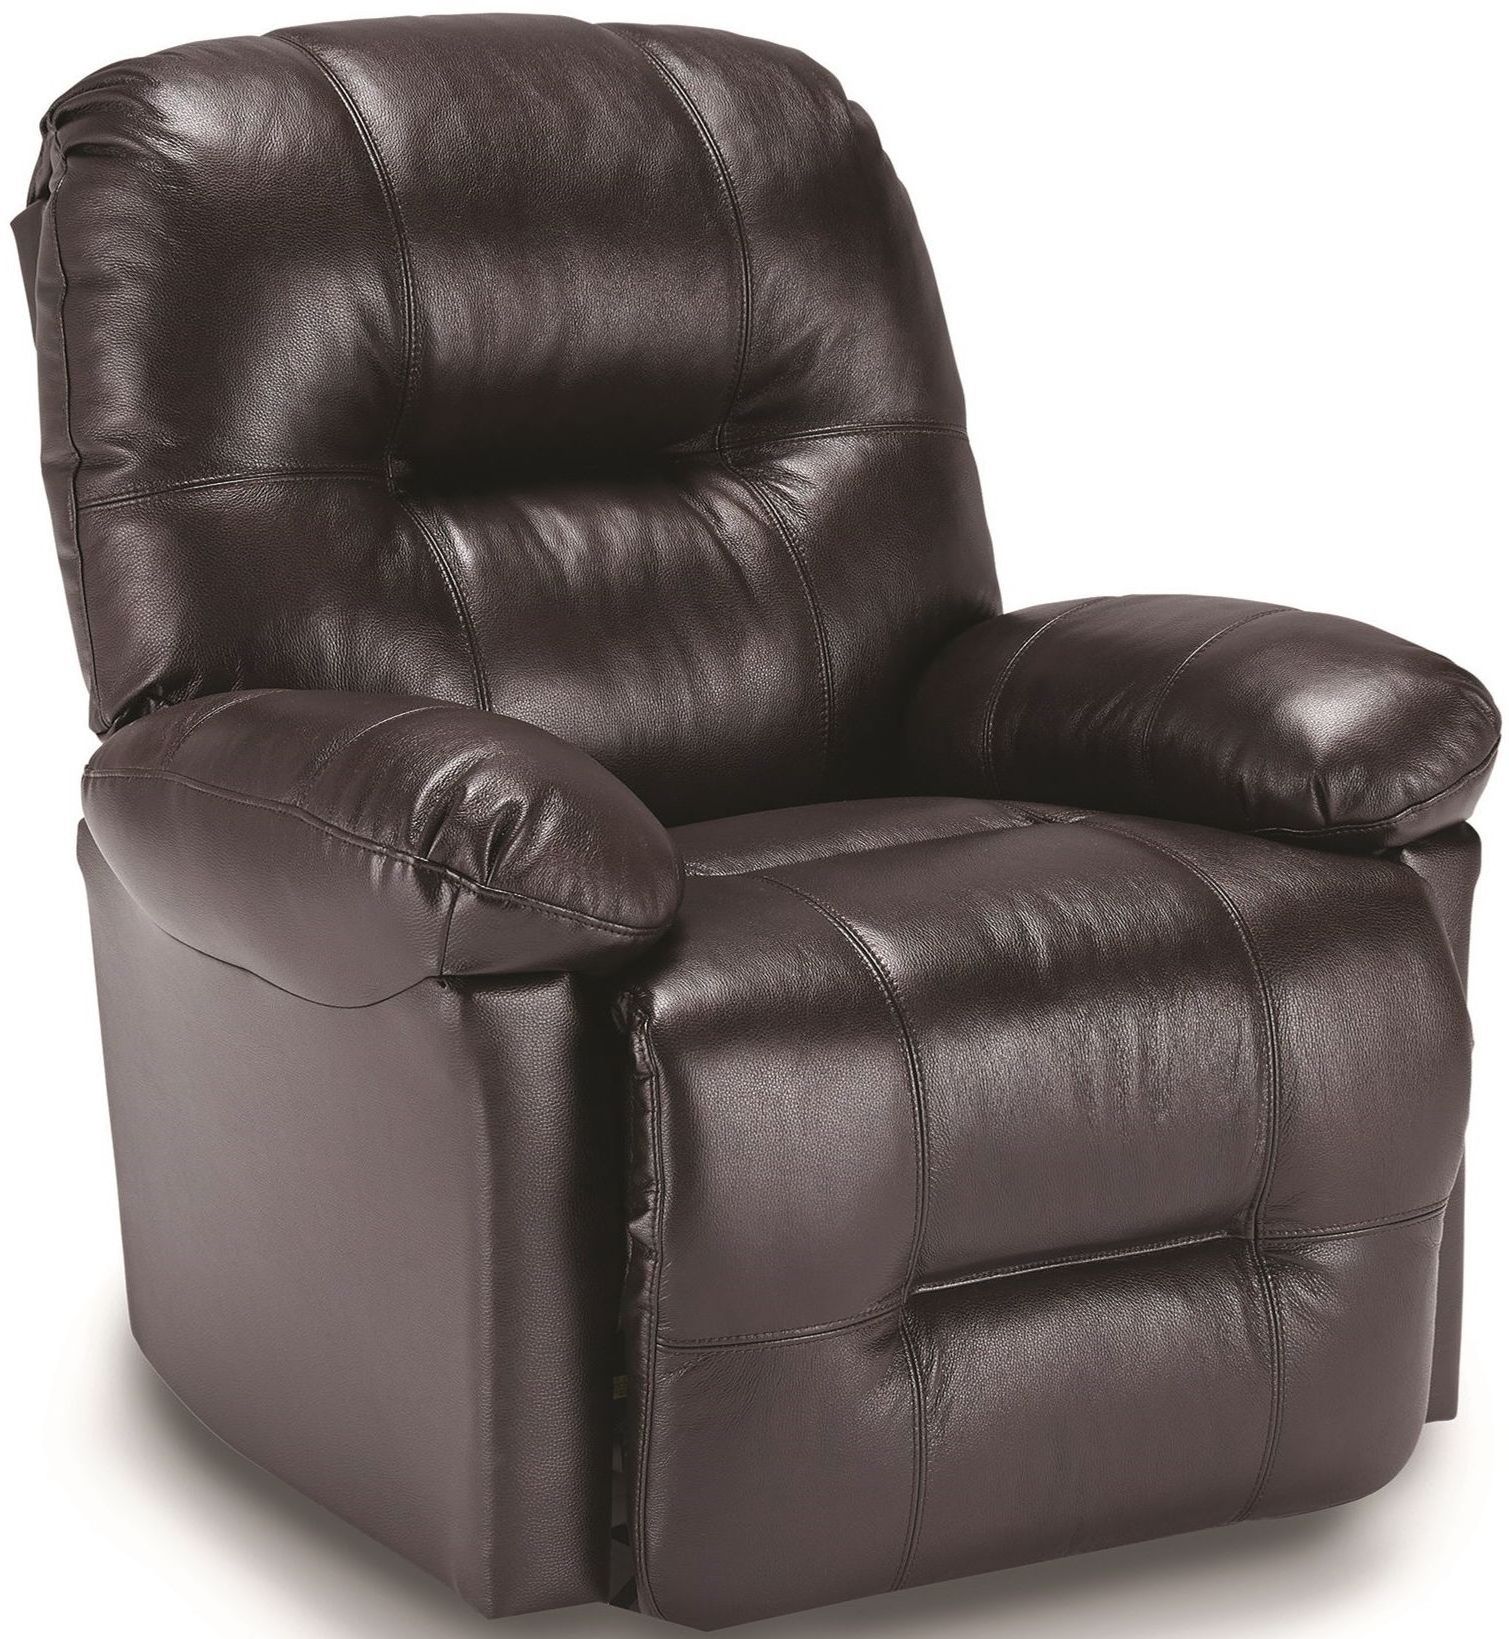 Best® Home Furnishings Zaynah Space Saver Recliner